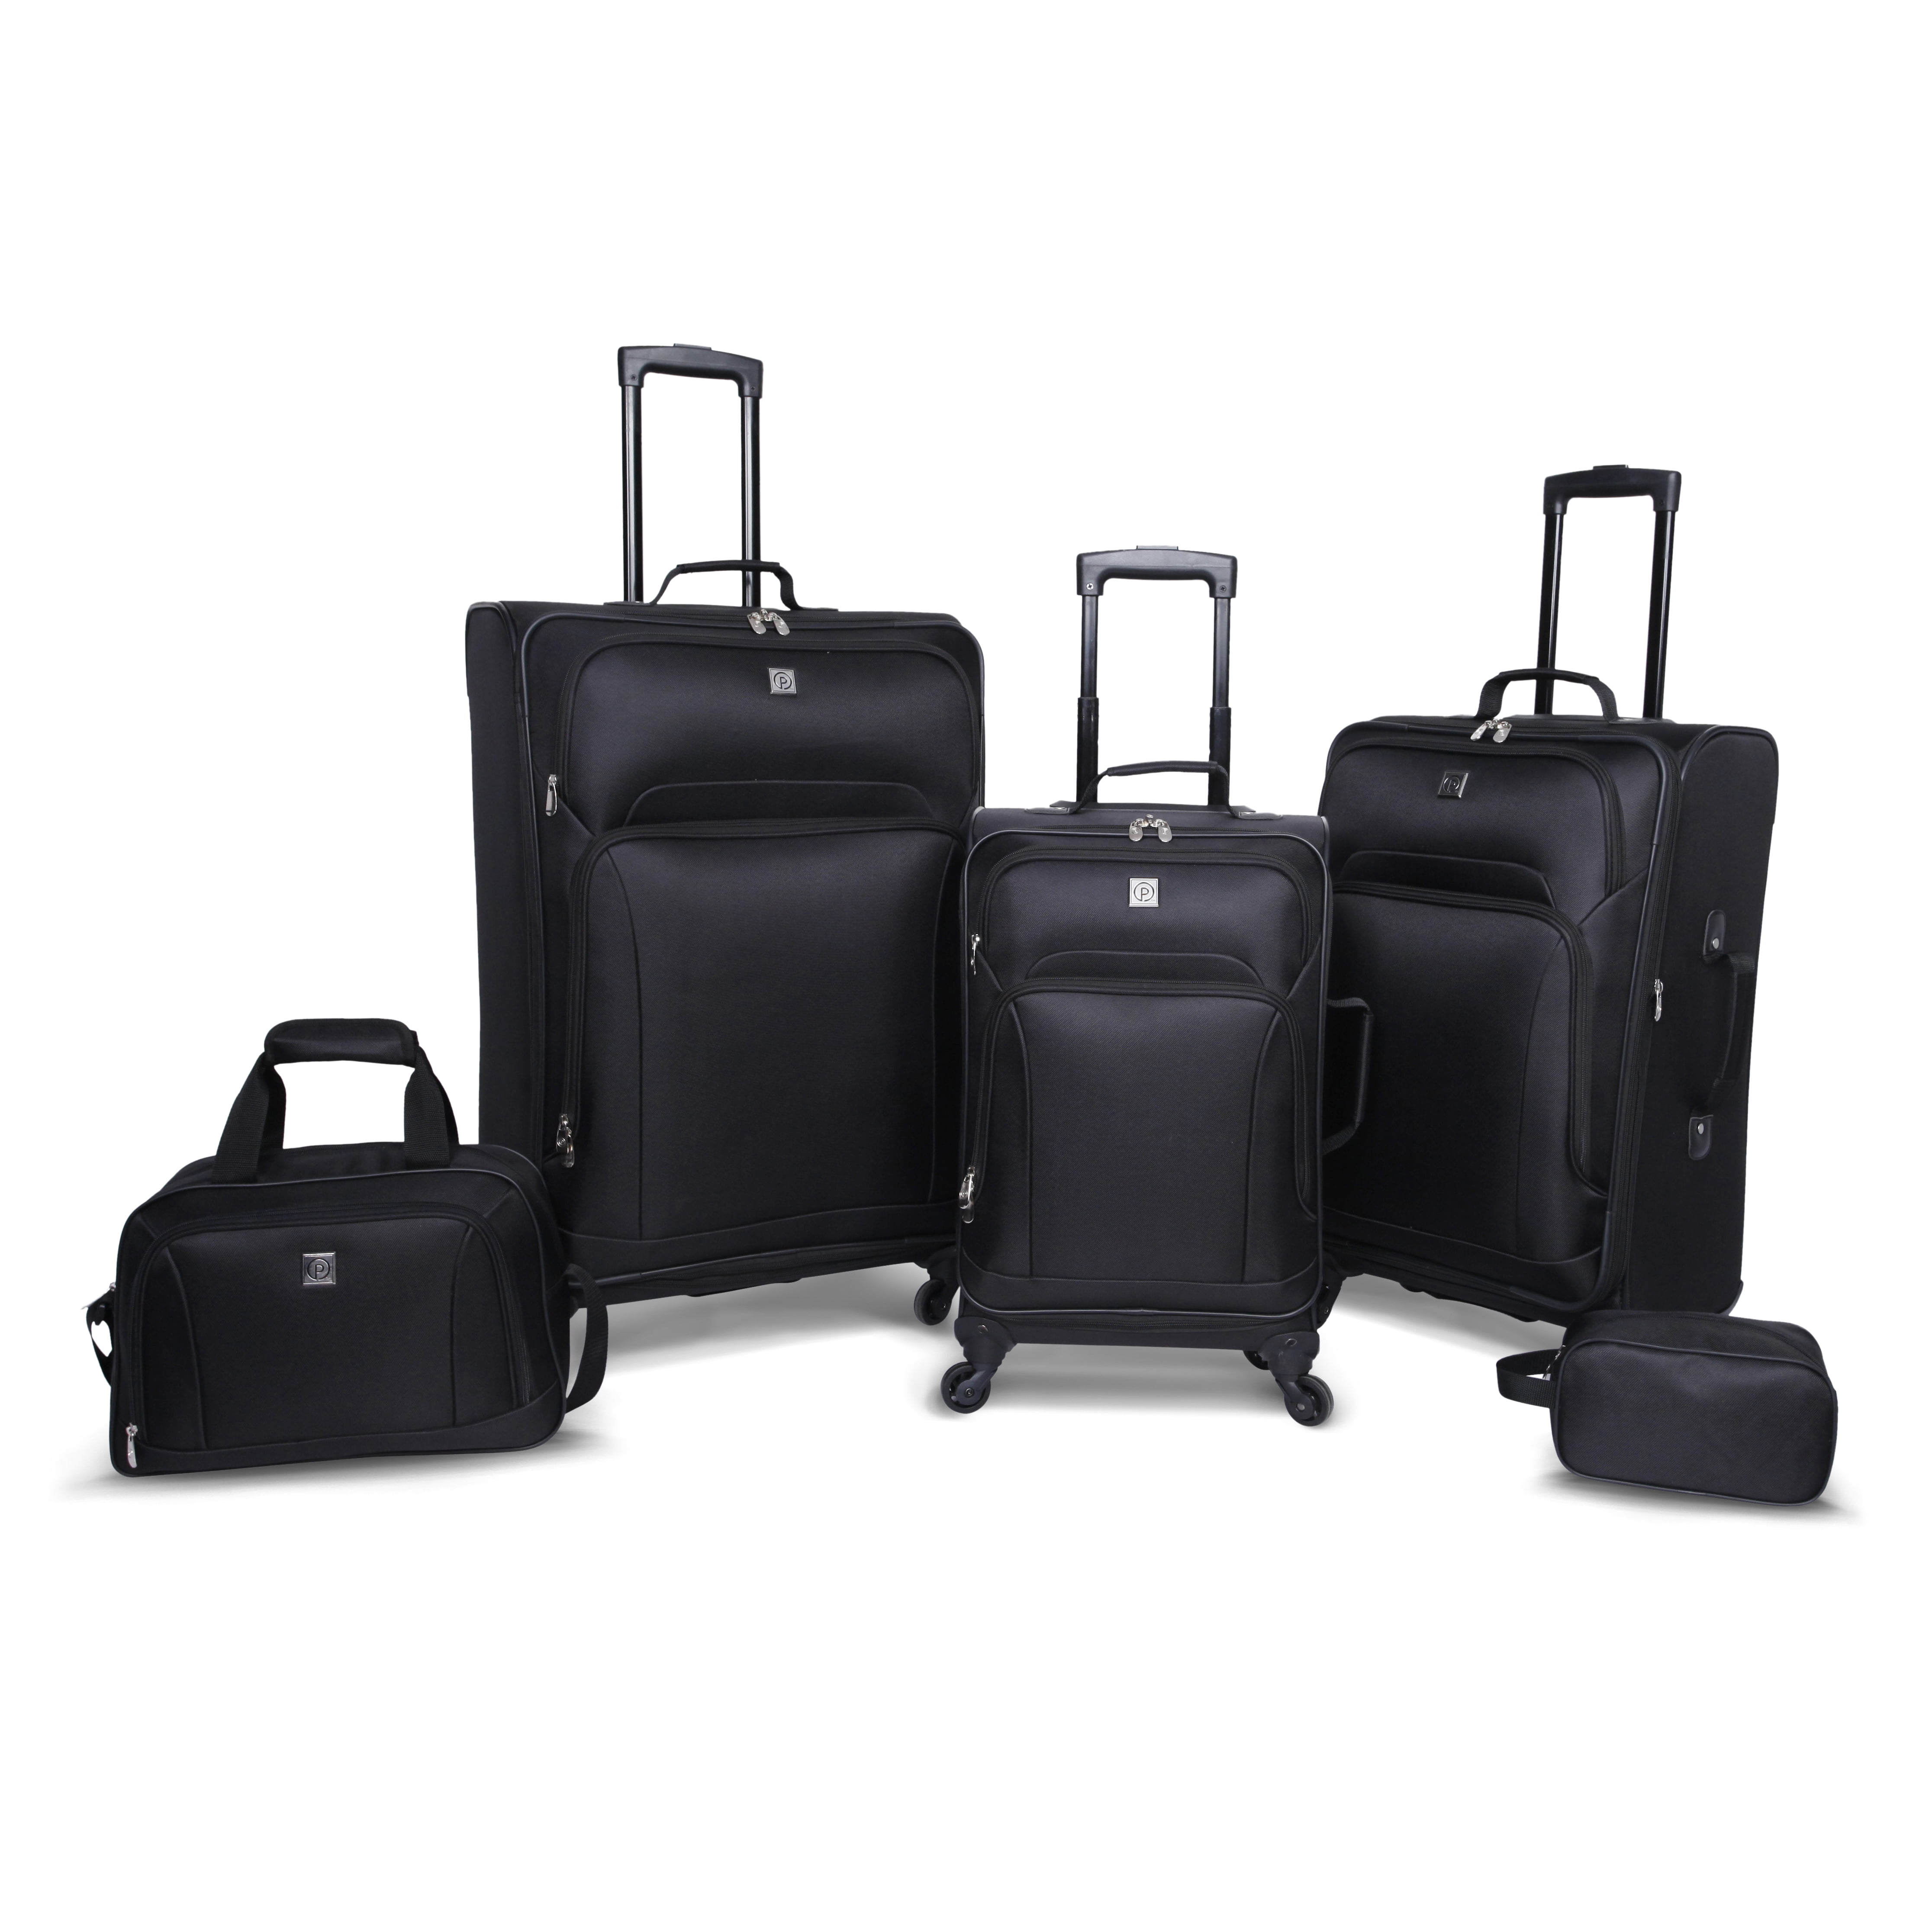 Protege 5 Piece Spinner Luggage Set, Includes 28" & 24" Check Bags, 20" Carry-on, Black